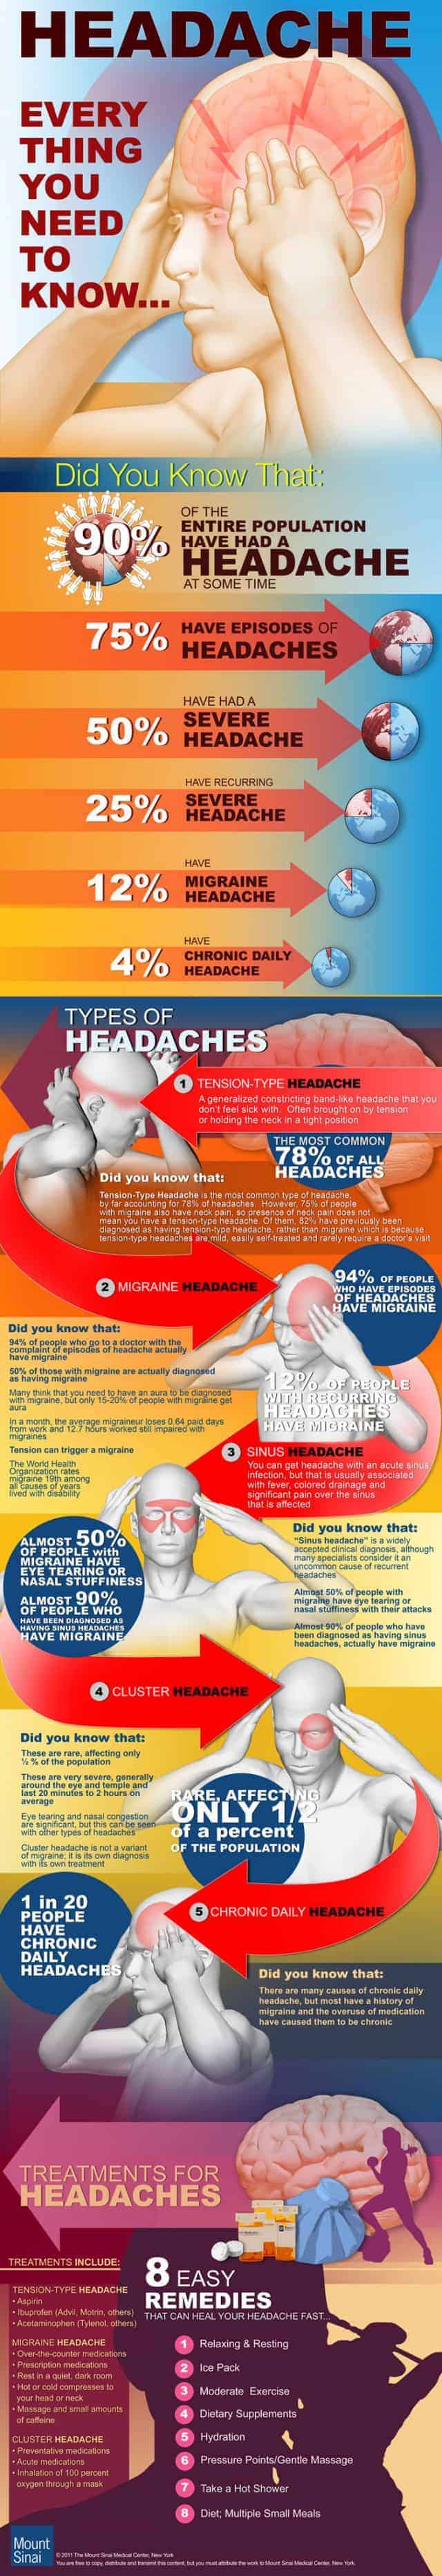 Every Thing You Need To Know Headache